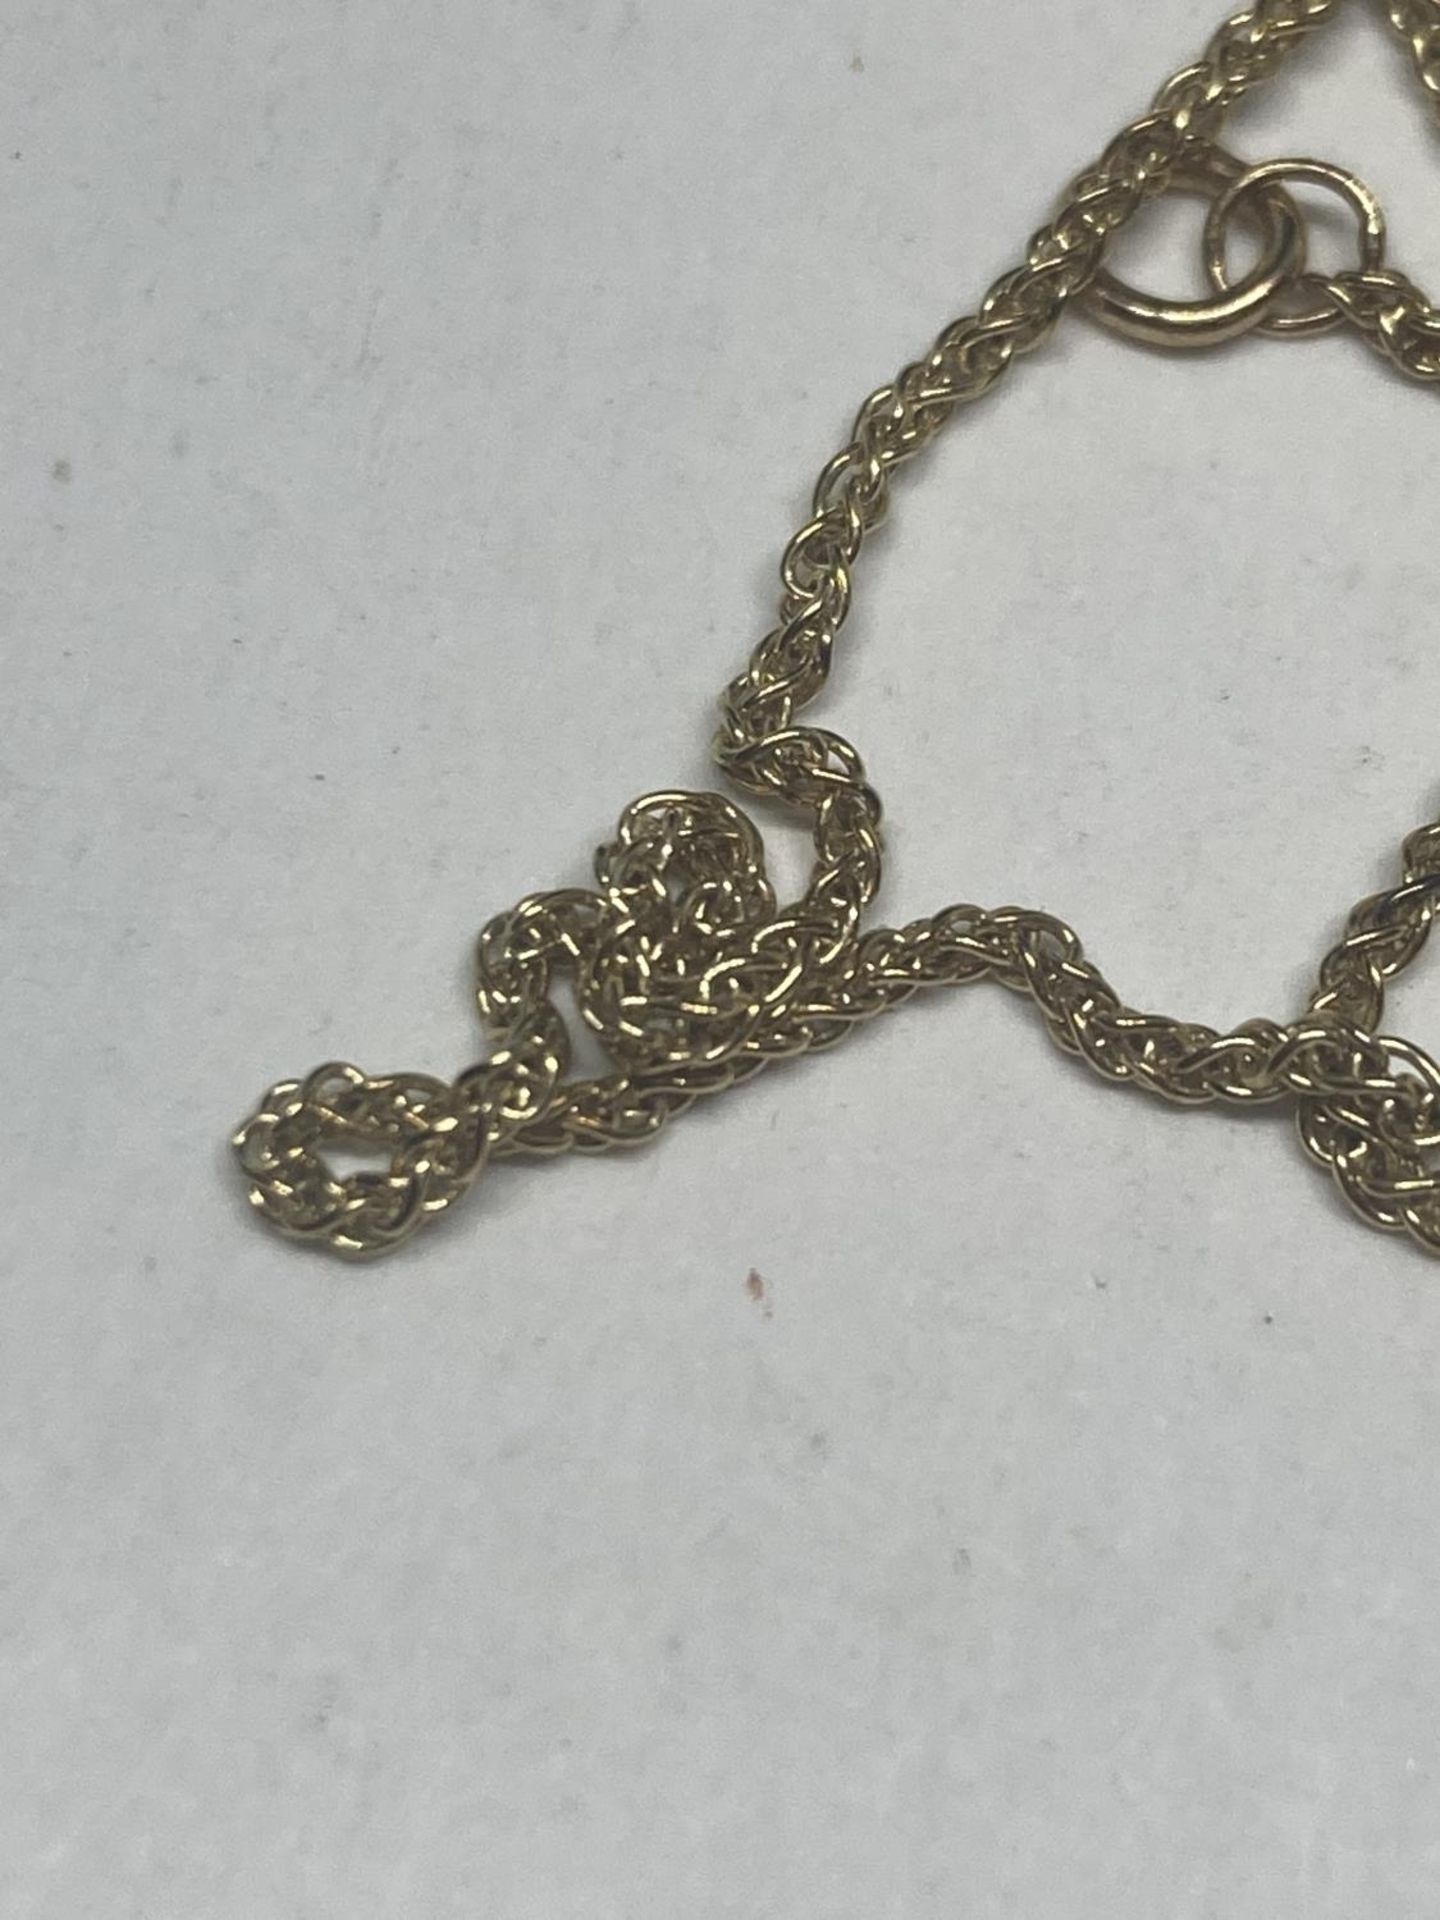 A MARKED 9 CARAT GOLD NECKLACE GROSS WEIGHT 2.5 GRAMS - Image 4 of 6